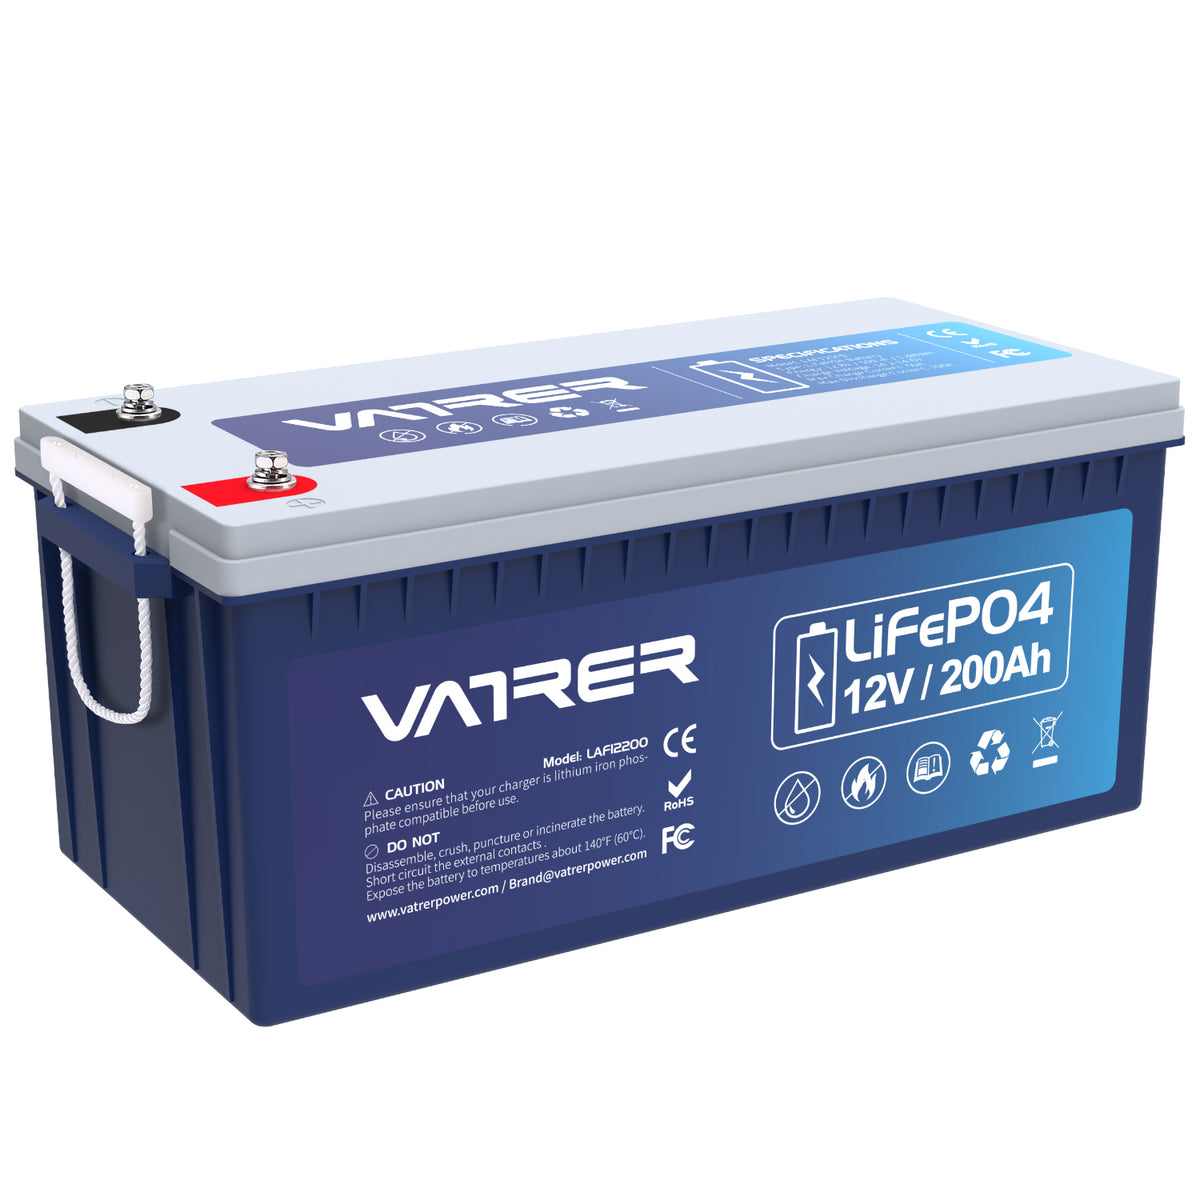 Vatrer 12V 100AH LiFePO4 Self-Heating Lithium Battery with